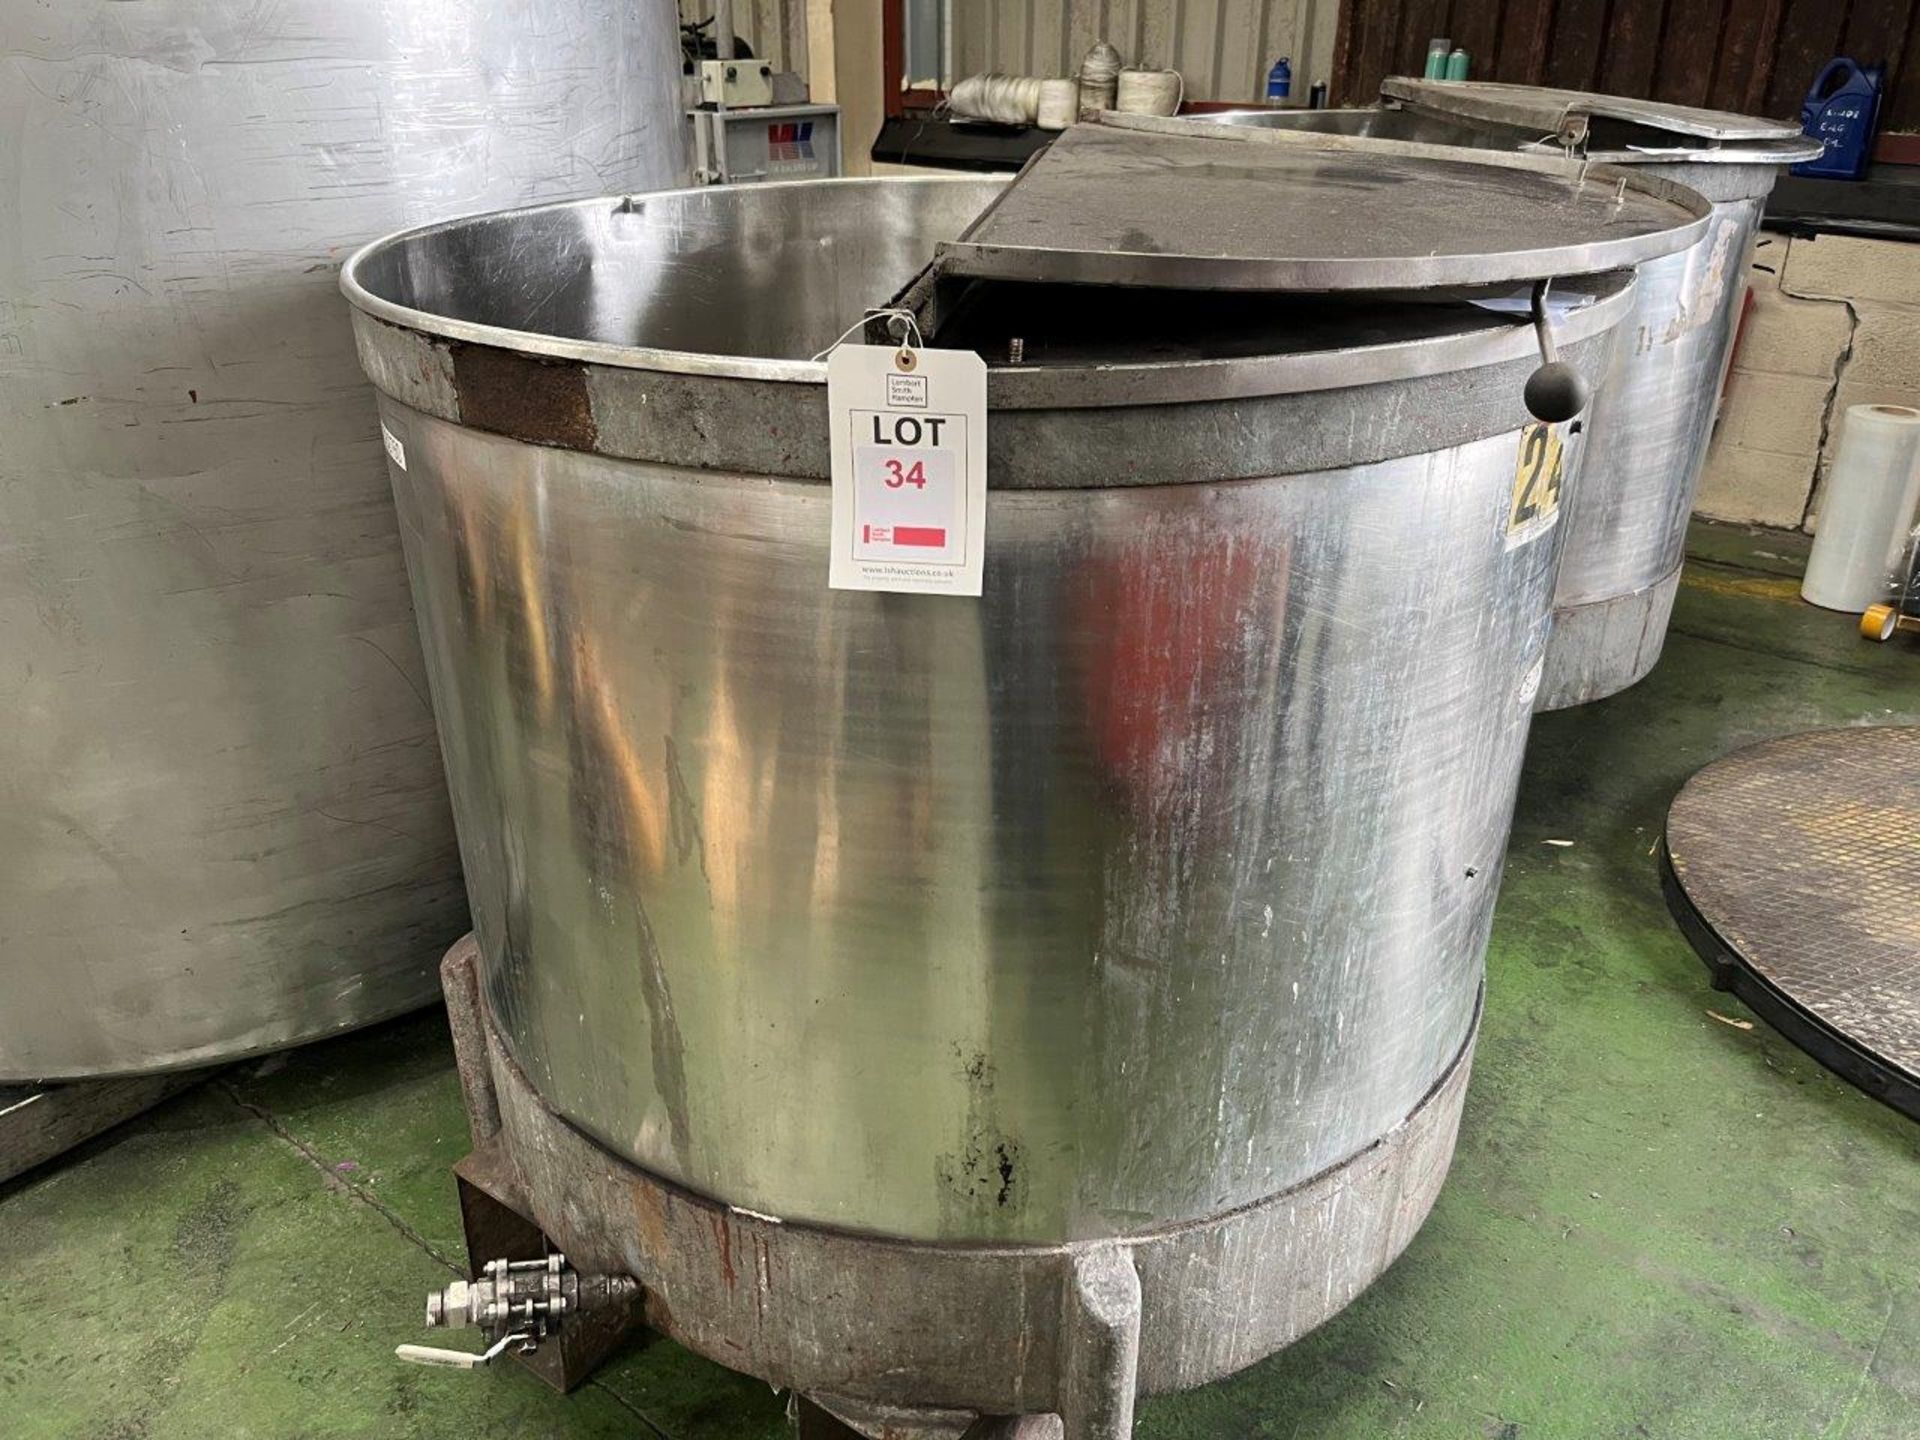 Stainless steel mixing vessel